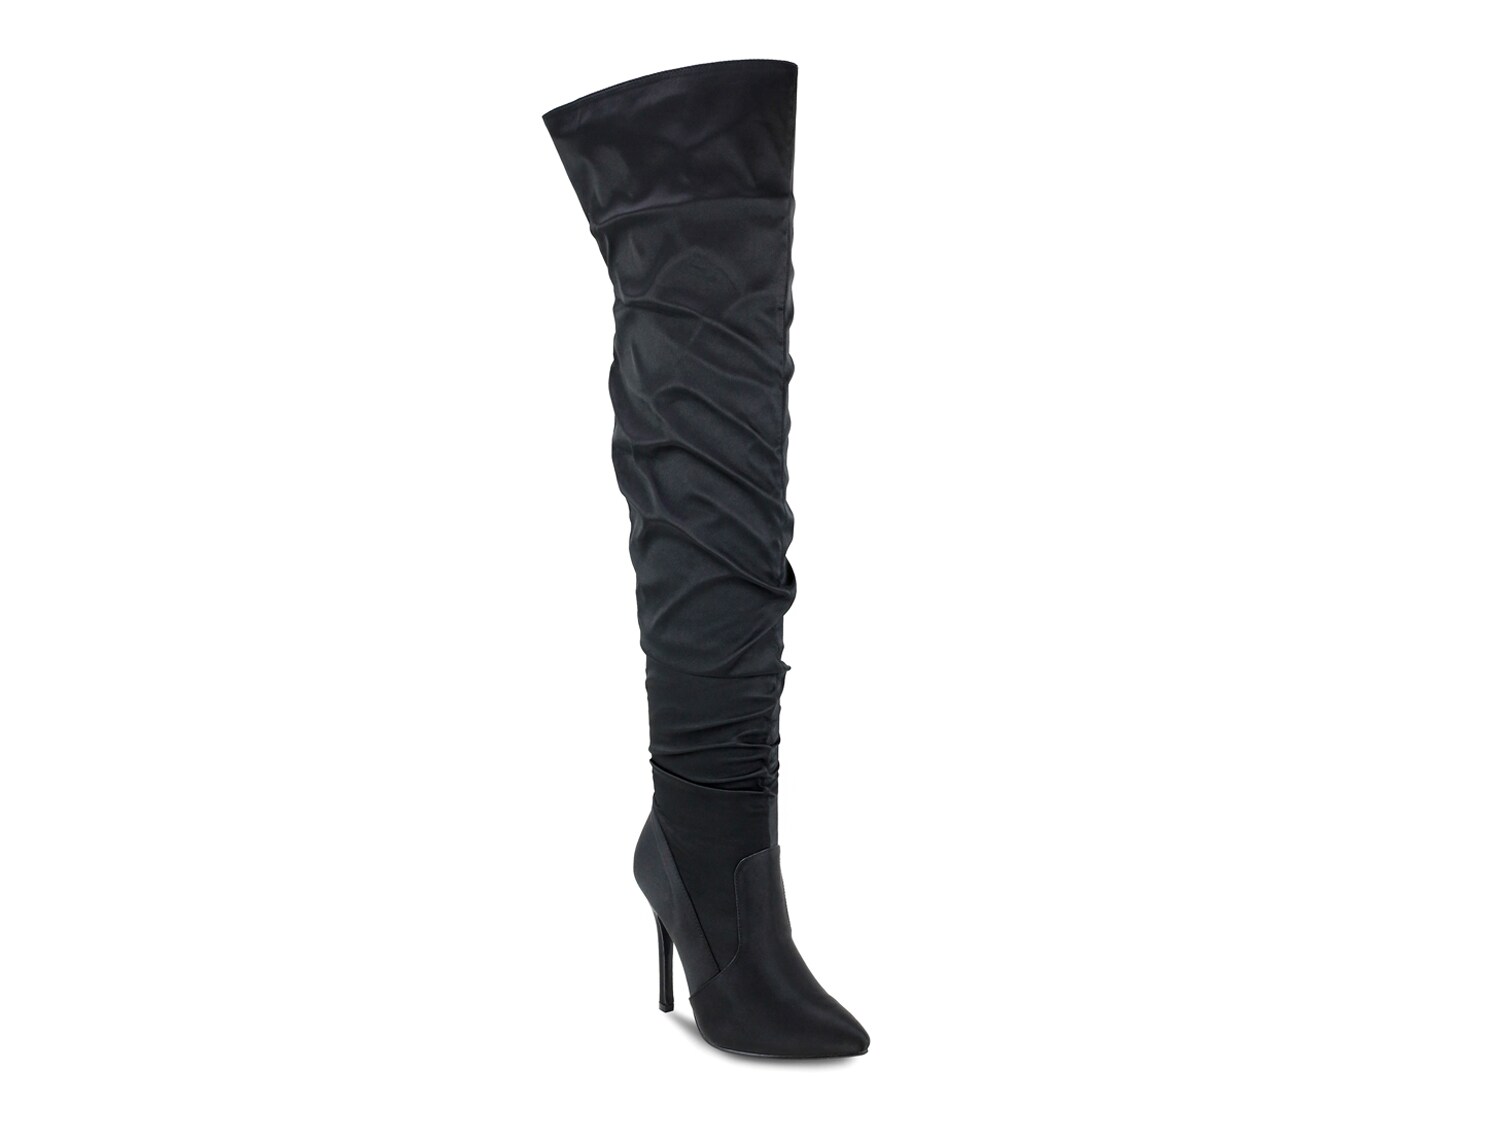 Olivia Miller Sayville Thigh High Boot - Free Shipping | DSW